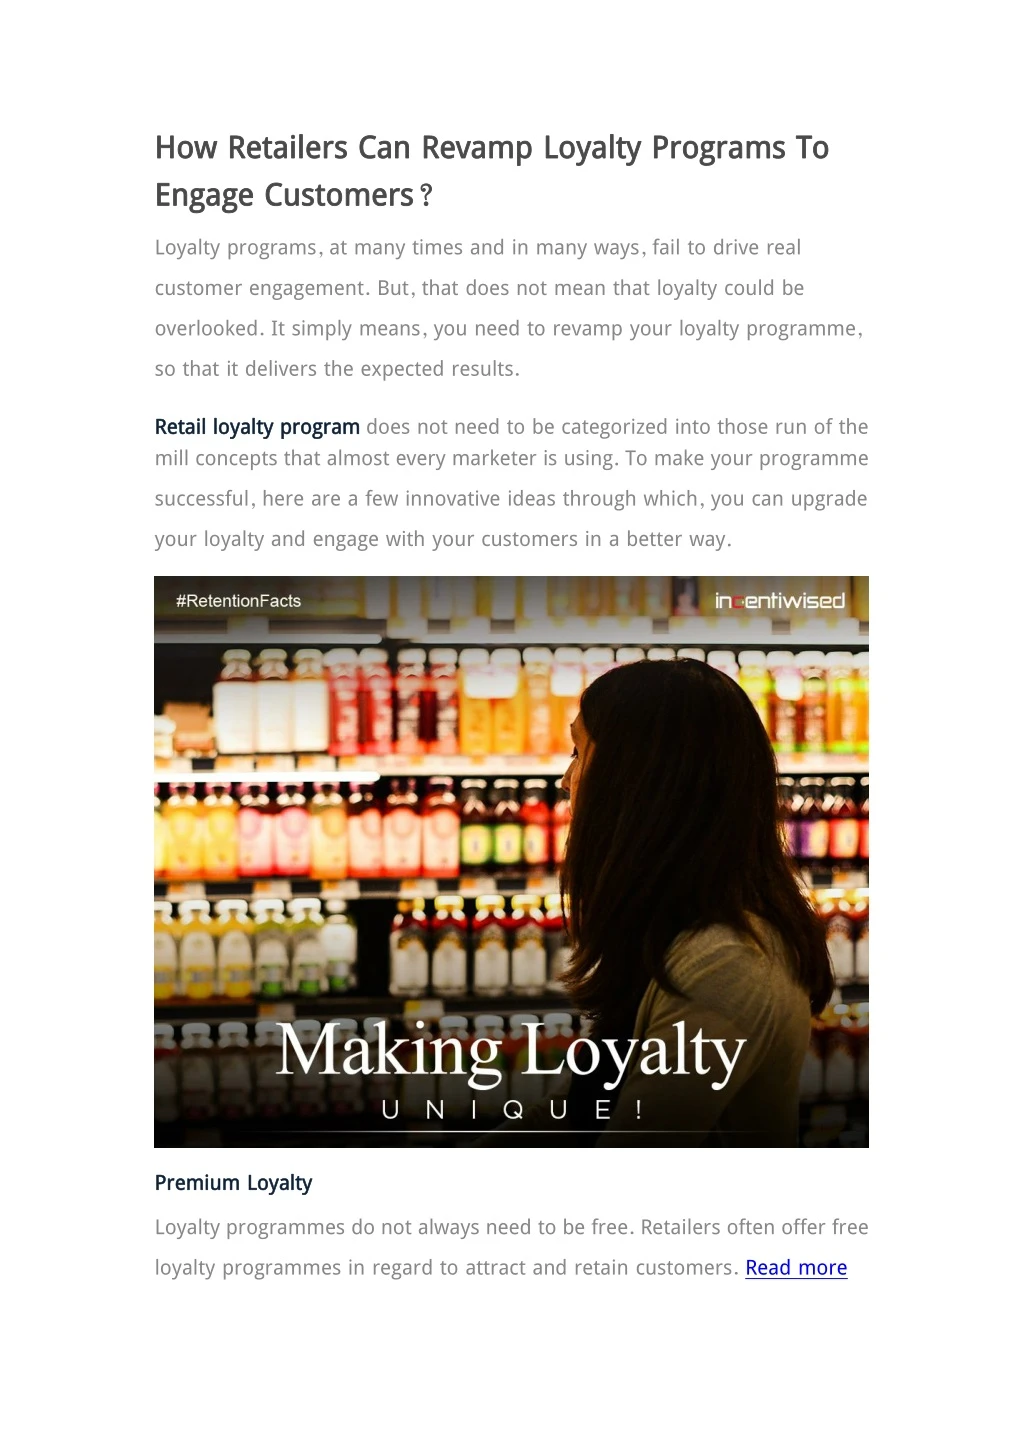 how how retailers retailers can engage engage